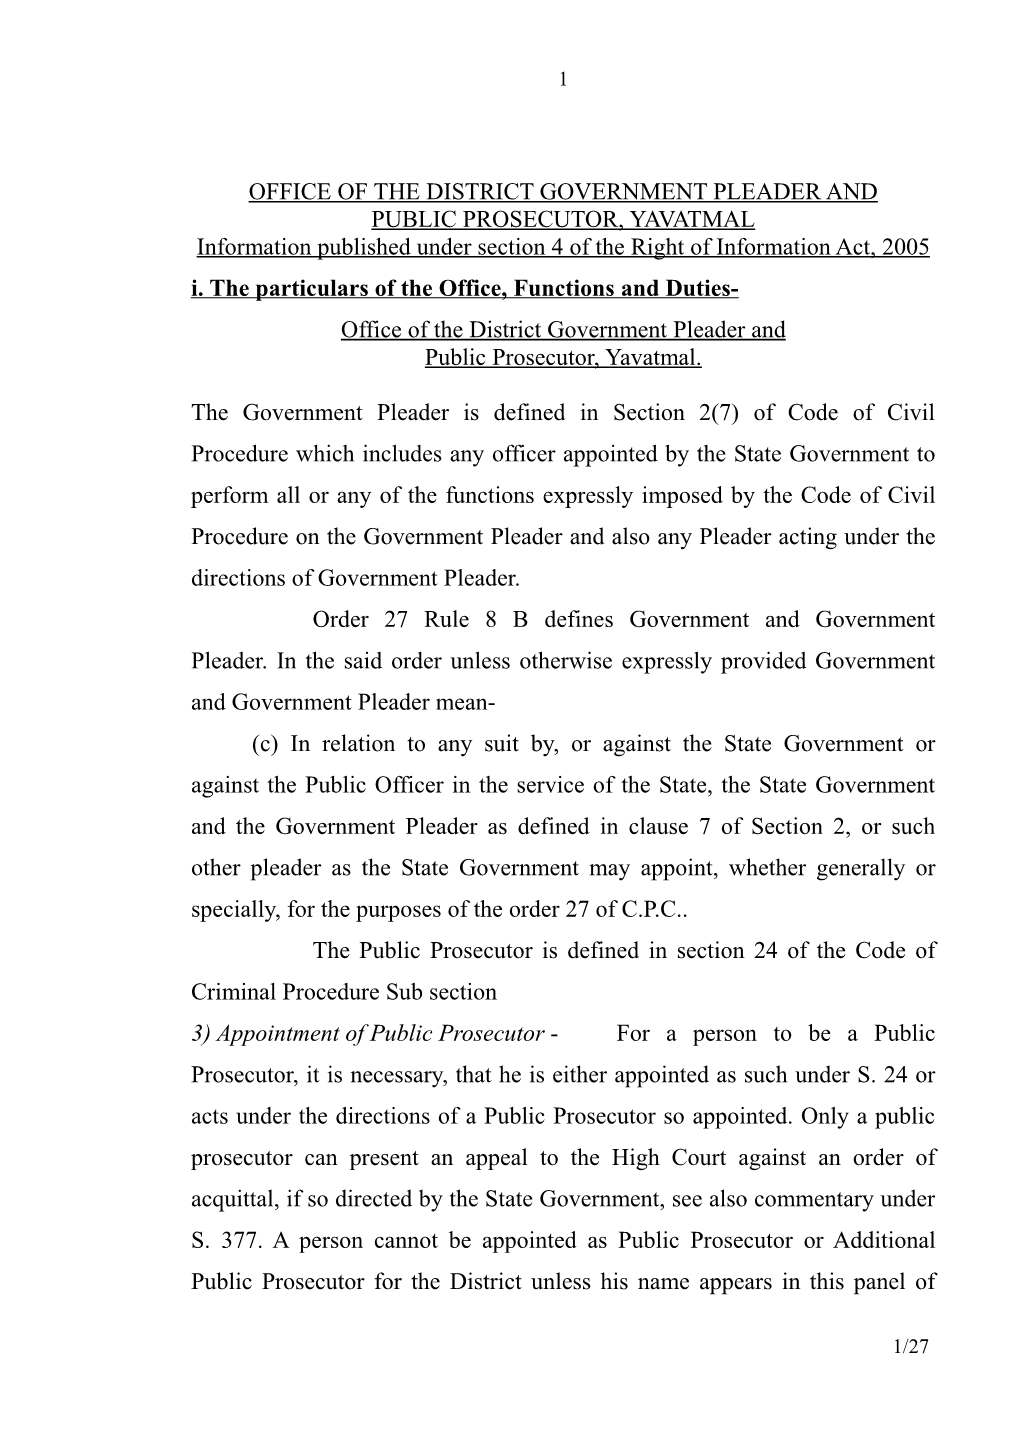 OFFICE of the DISTRICT GOVERNMENT PLEADER and PUBLIC PROSECUTOR, YAVATMAL Information Published Under Section 4 of the Right of Information Act, 2005 I